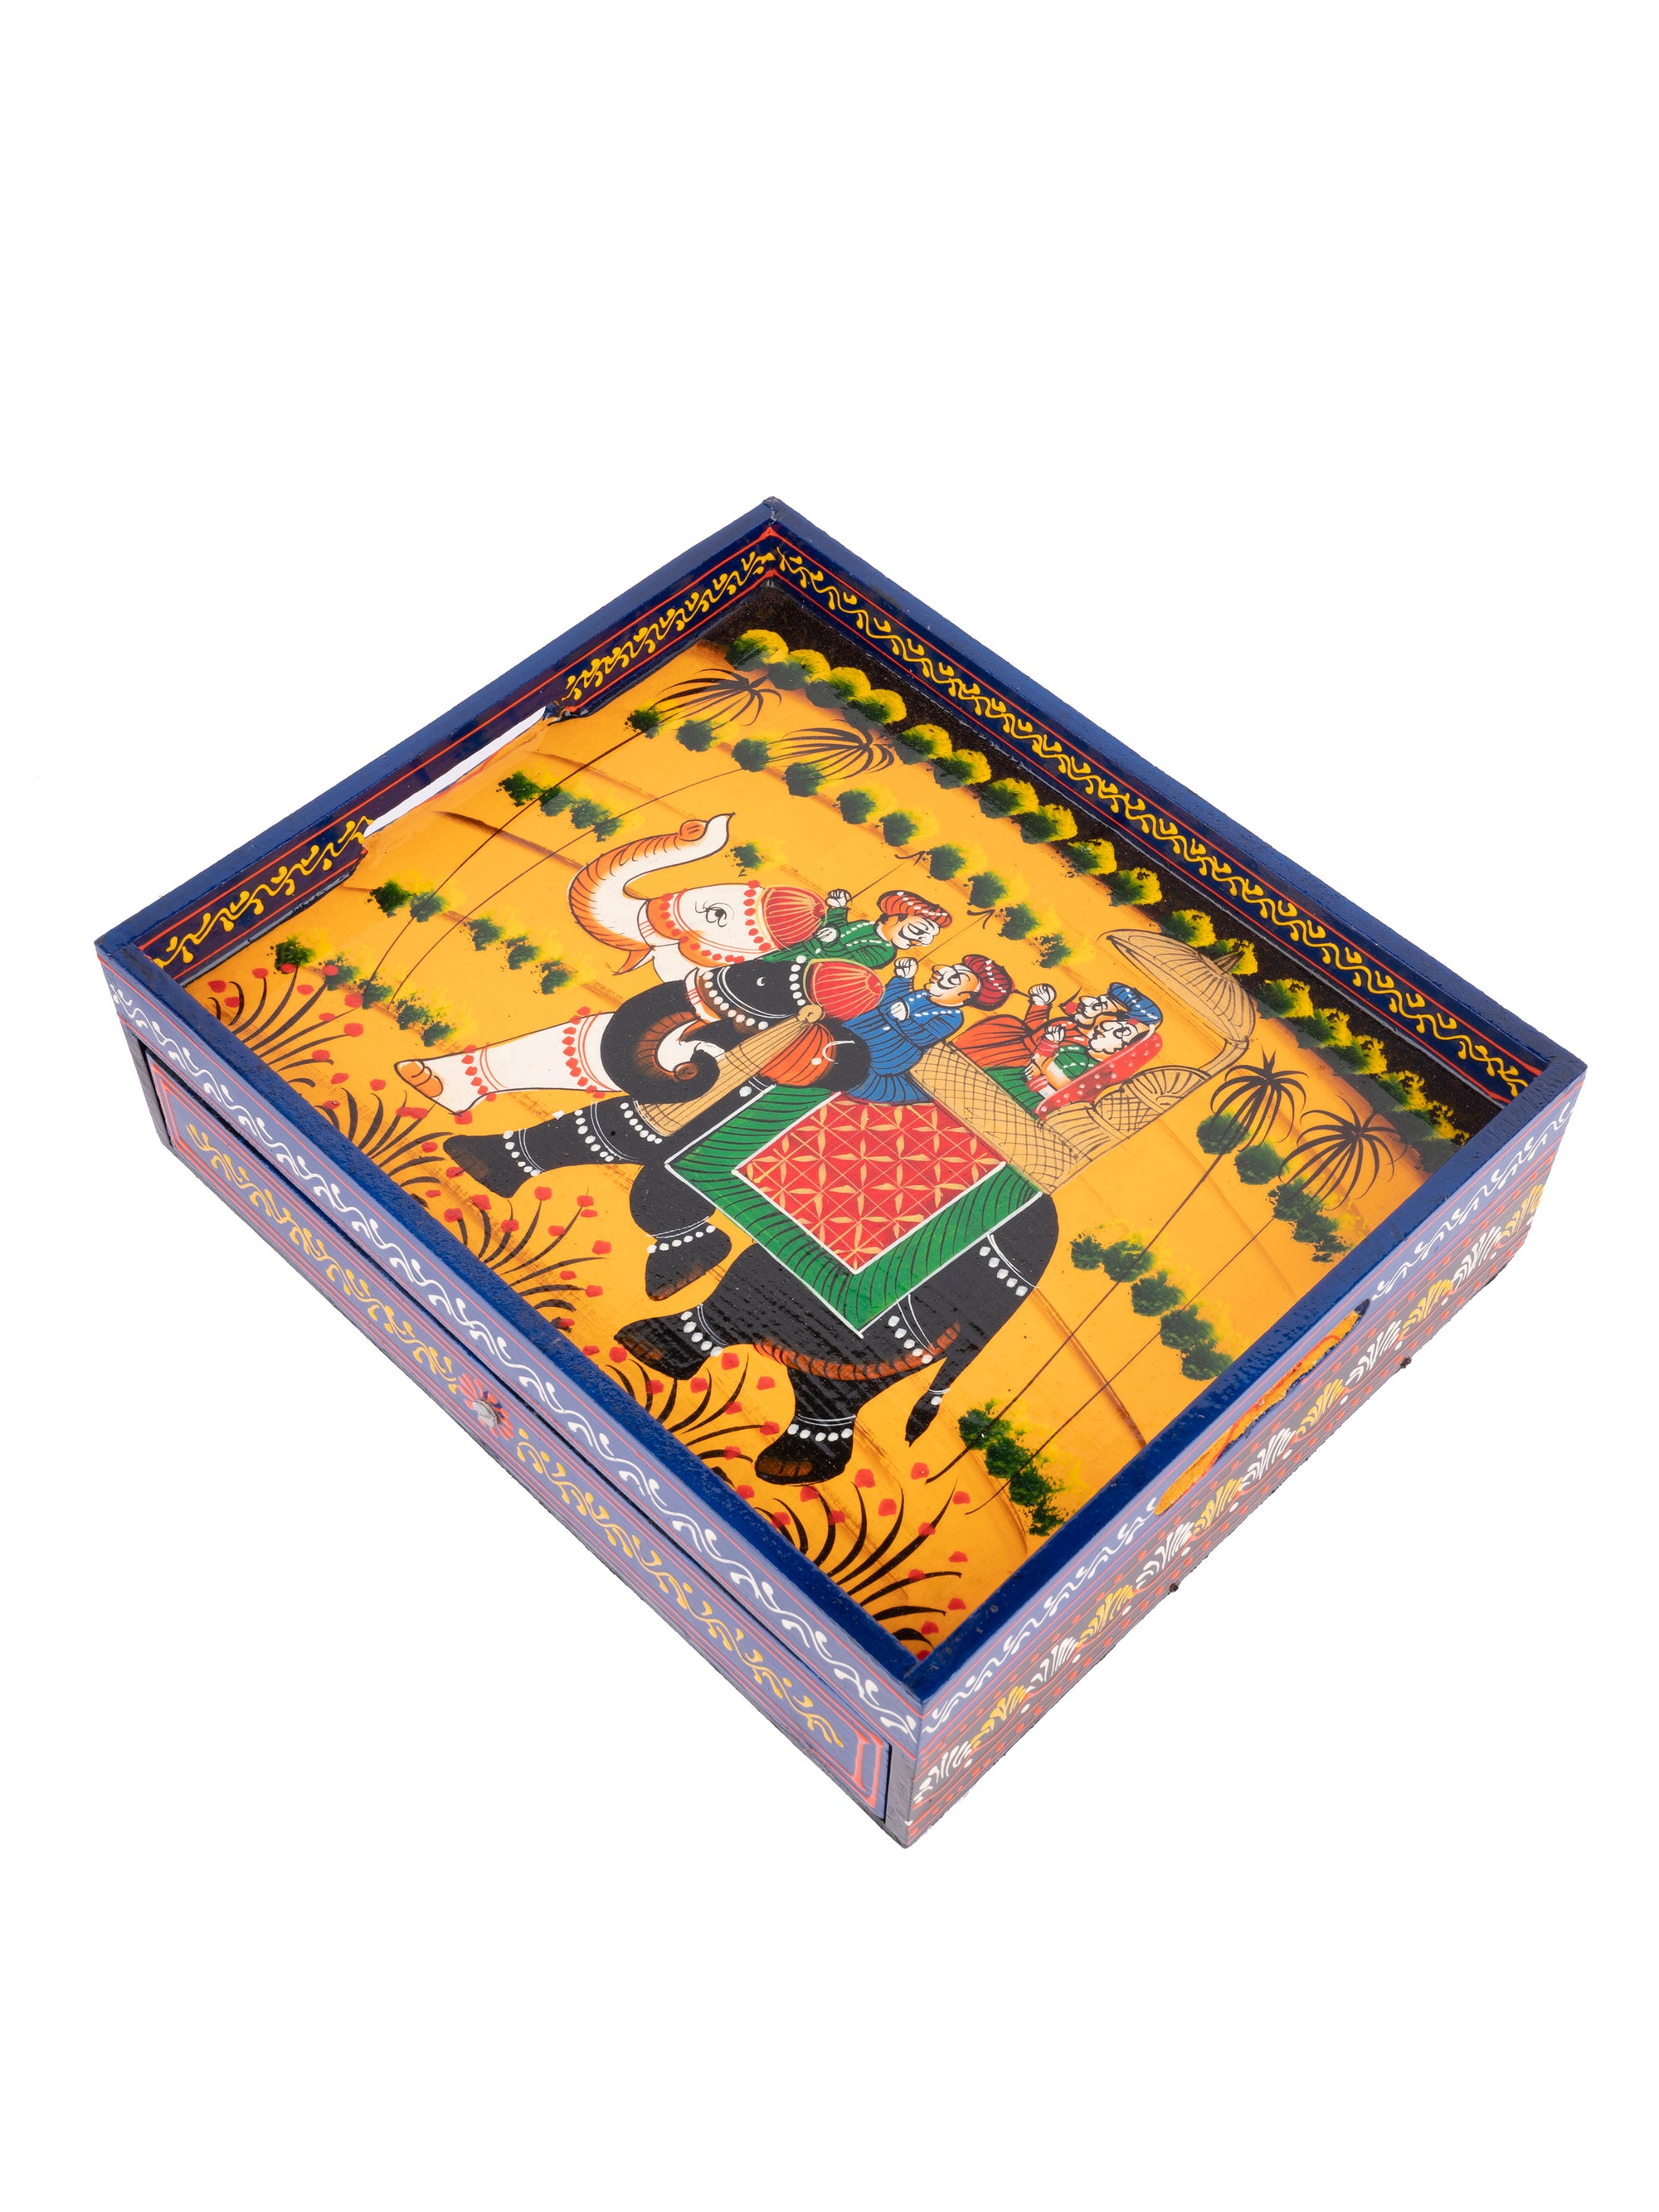 Colorful Hand Painted Square Wooden Tray with Drawers - The Heritage Artifacts